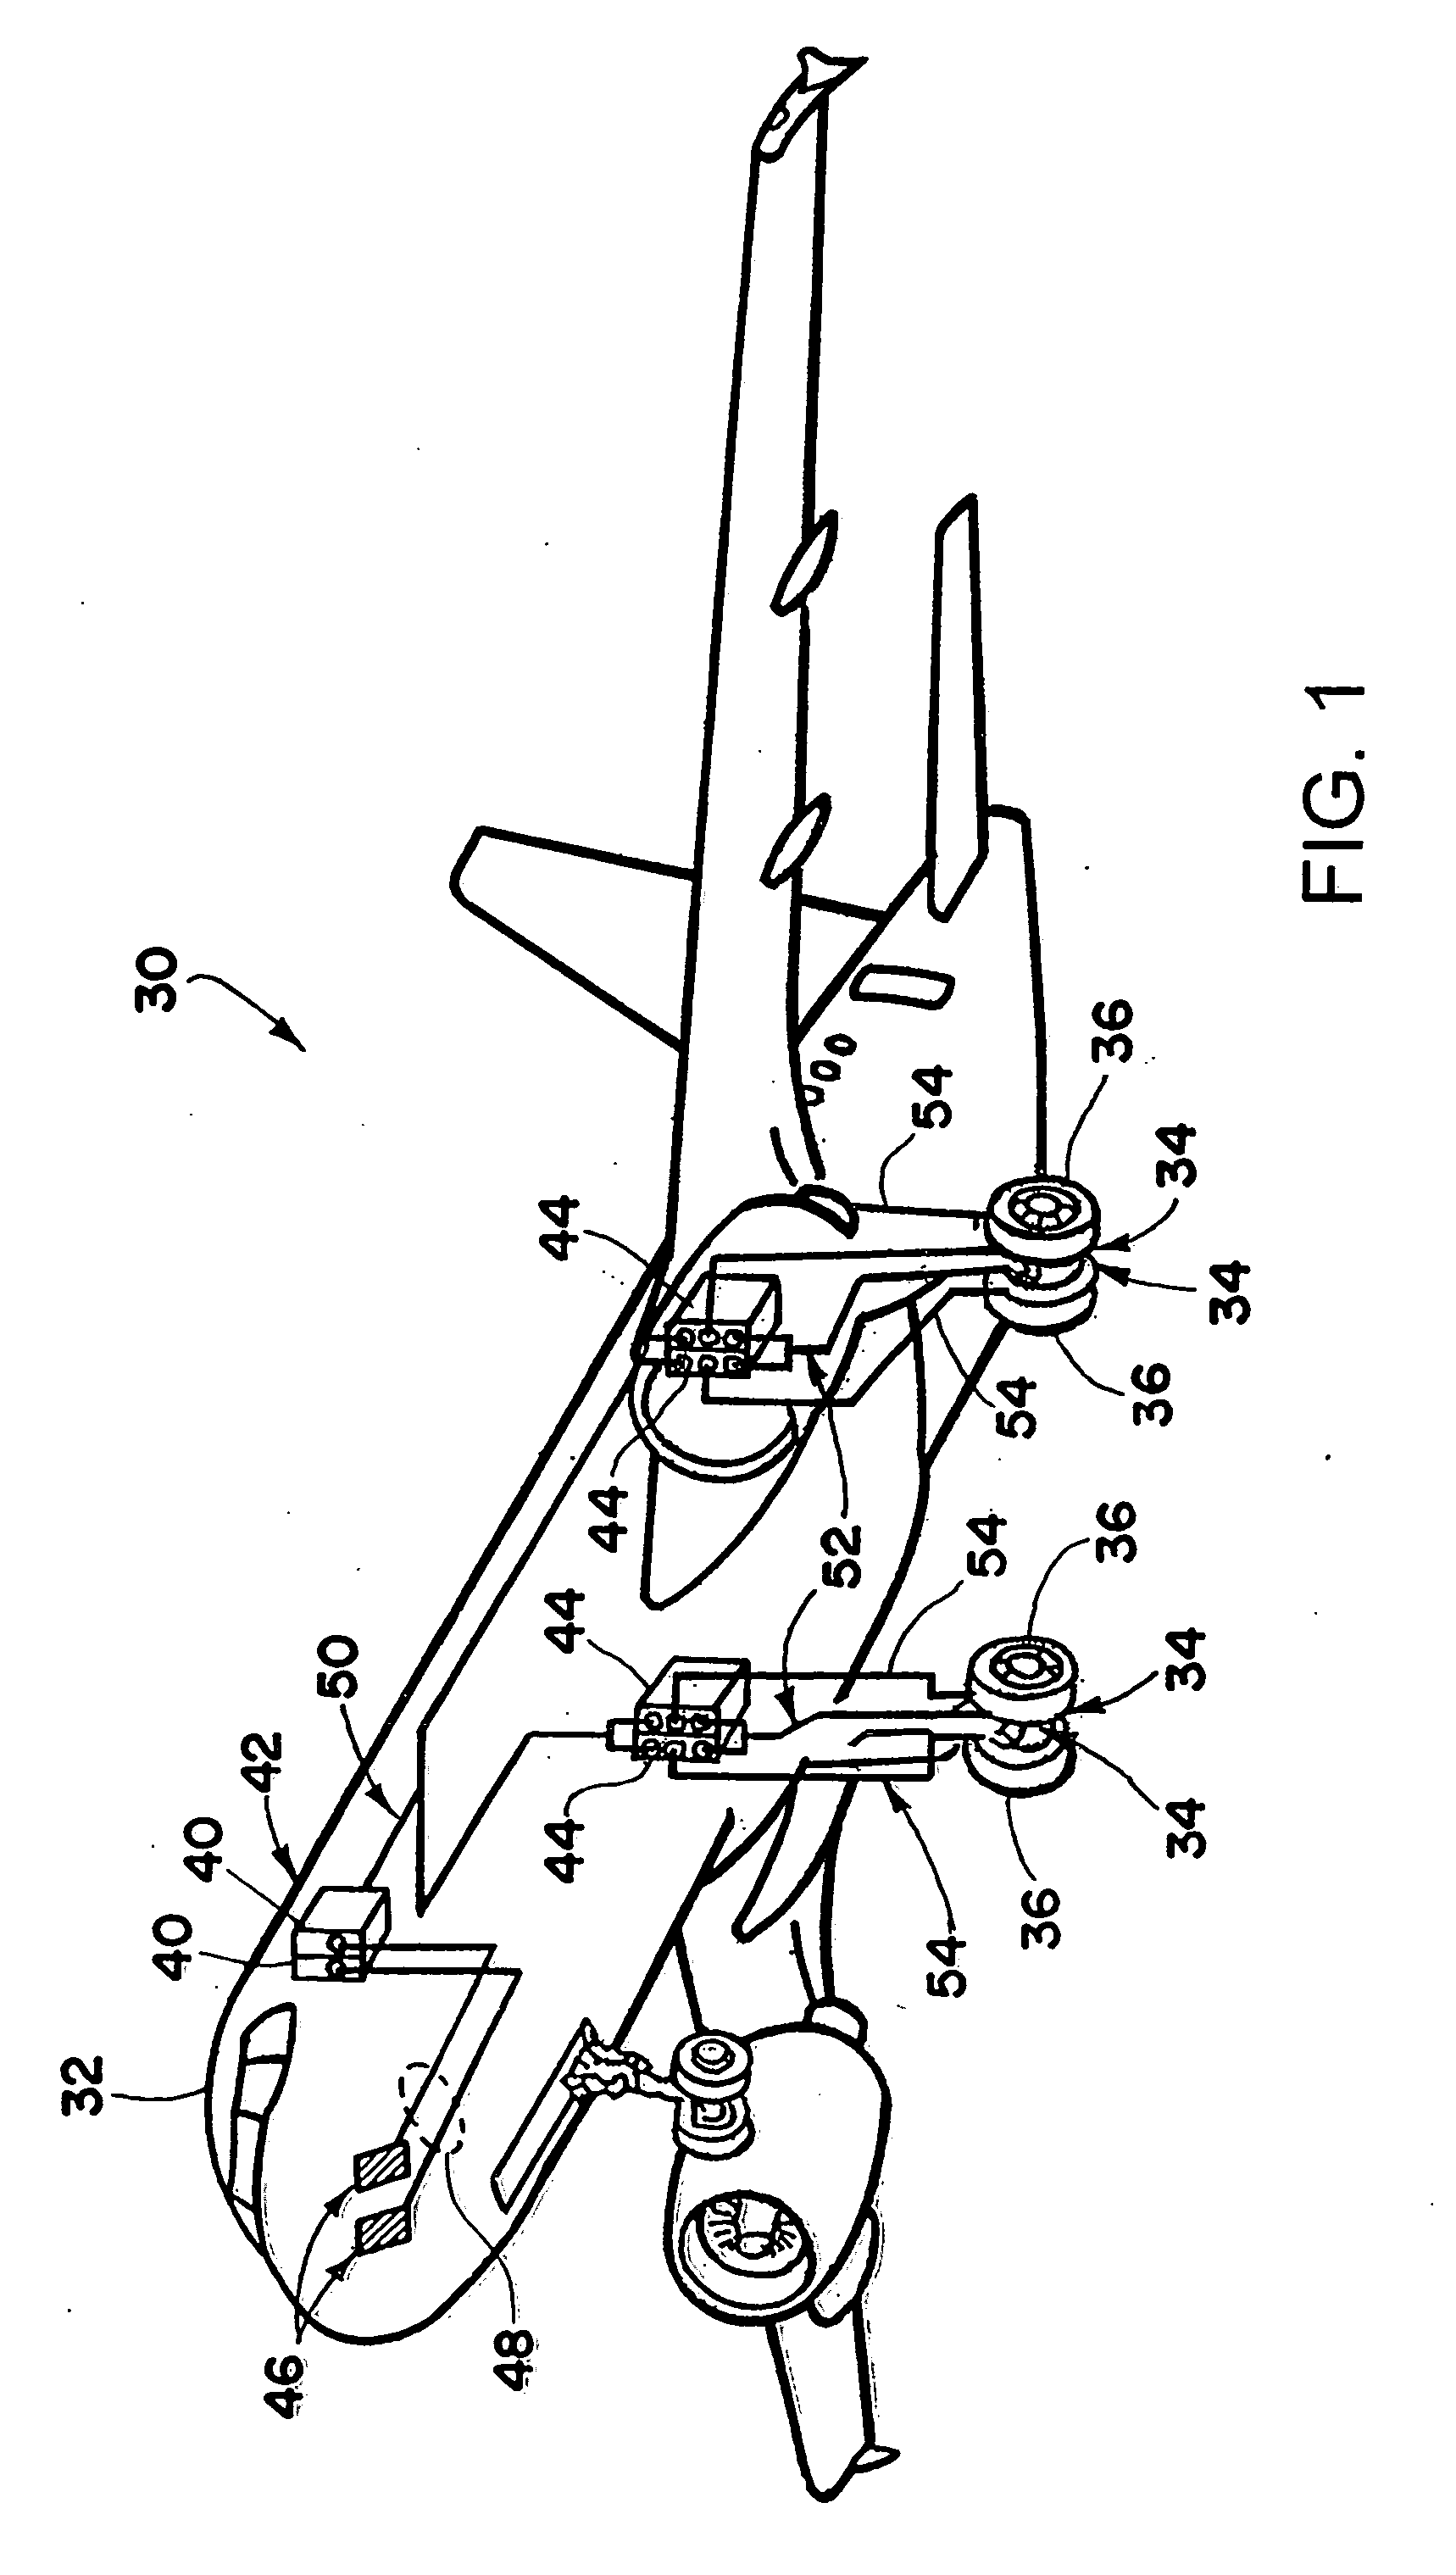 Aircraft taxi speed control system and method